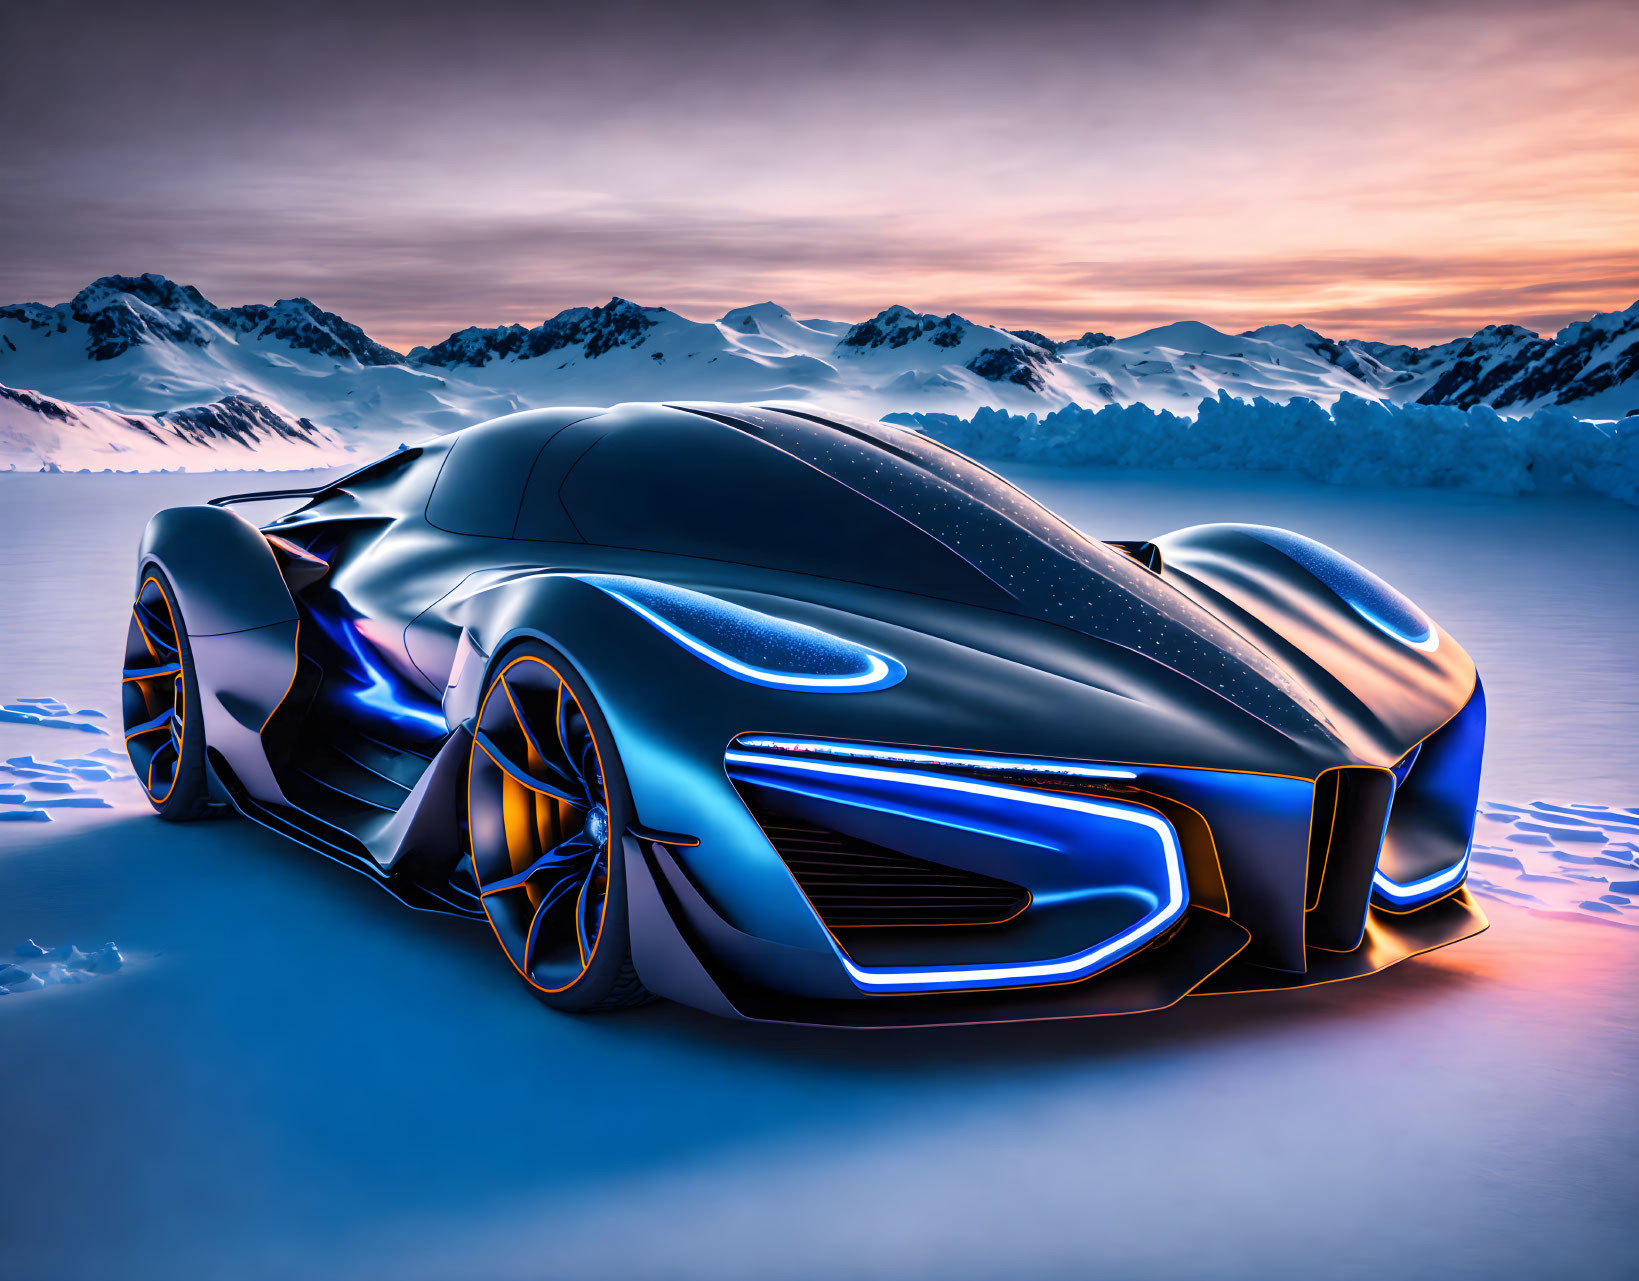 Sleek futuristic car with glowing blue accents on icy surface